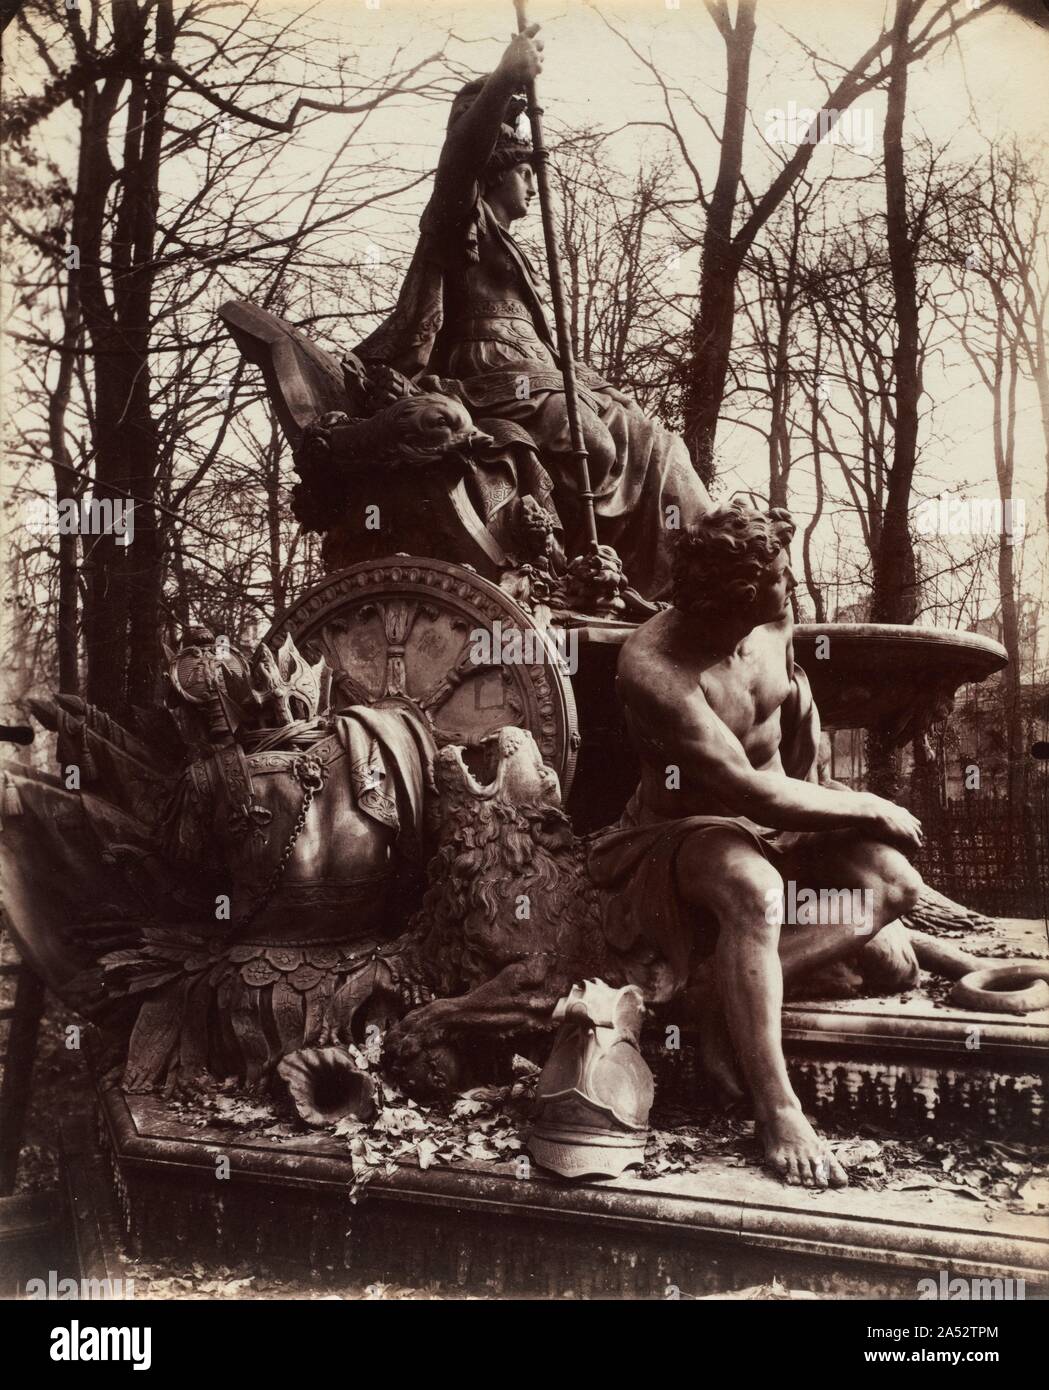 Versailles, Fountain of Triumphant France, 1904. From 1901 until his death in 1927, Atget devoted much of his time to documenting ch&#xe2;teaus and parks in and around Paris. Initially and most frequently, he was attracted to the gardens of Versailles, first working there until 1906. This intriguing detail of the Fountain of Triumphant France isolates two of its three allegorical figures: the seated representation of the French Empire behind Jean-Baptiste Tubi&#x2019;s sculpture denoting Spain. The fountain was commissioned by Louis XIV to celebrate the French victory over Spain and Holland. T Stock Photo